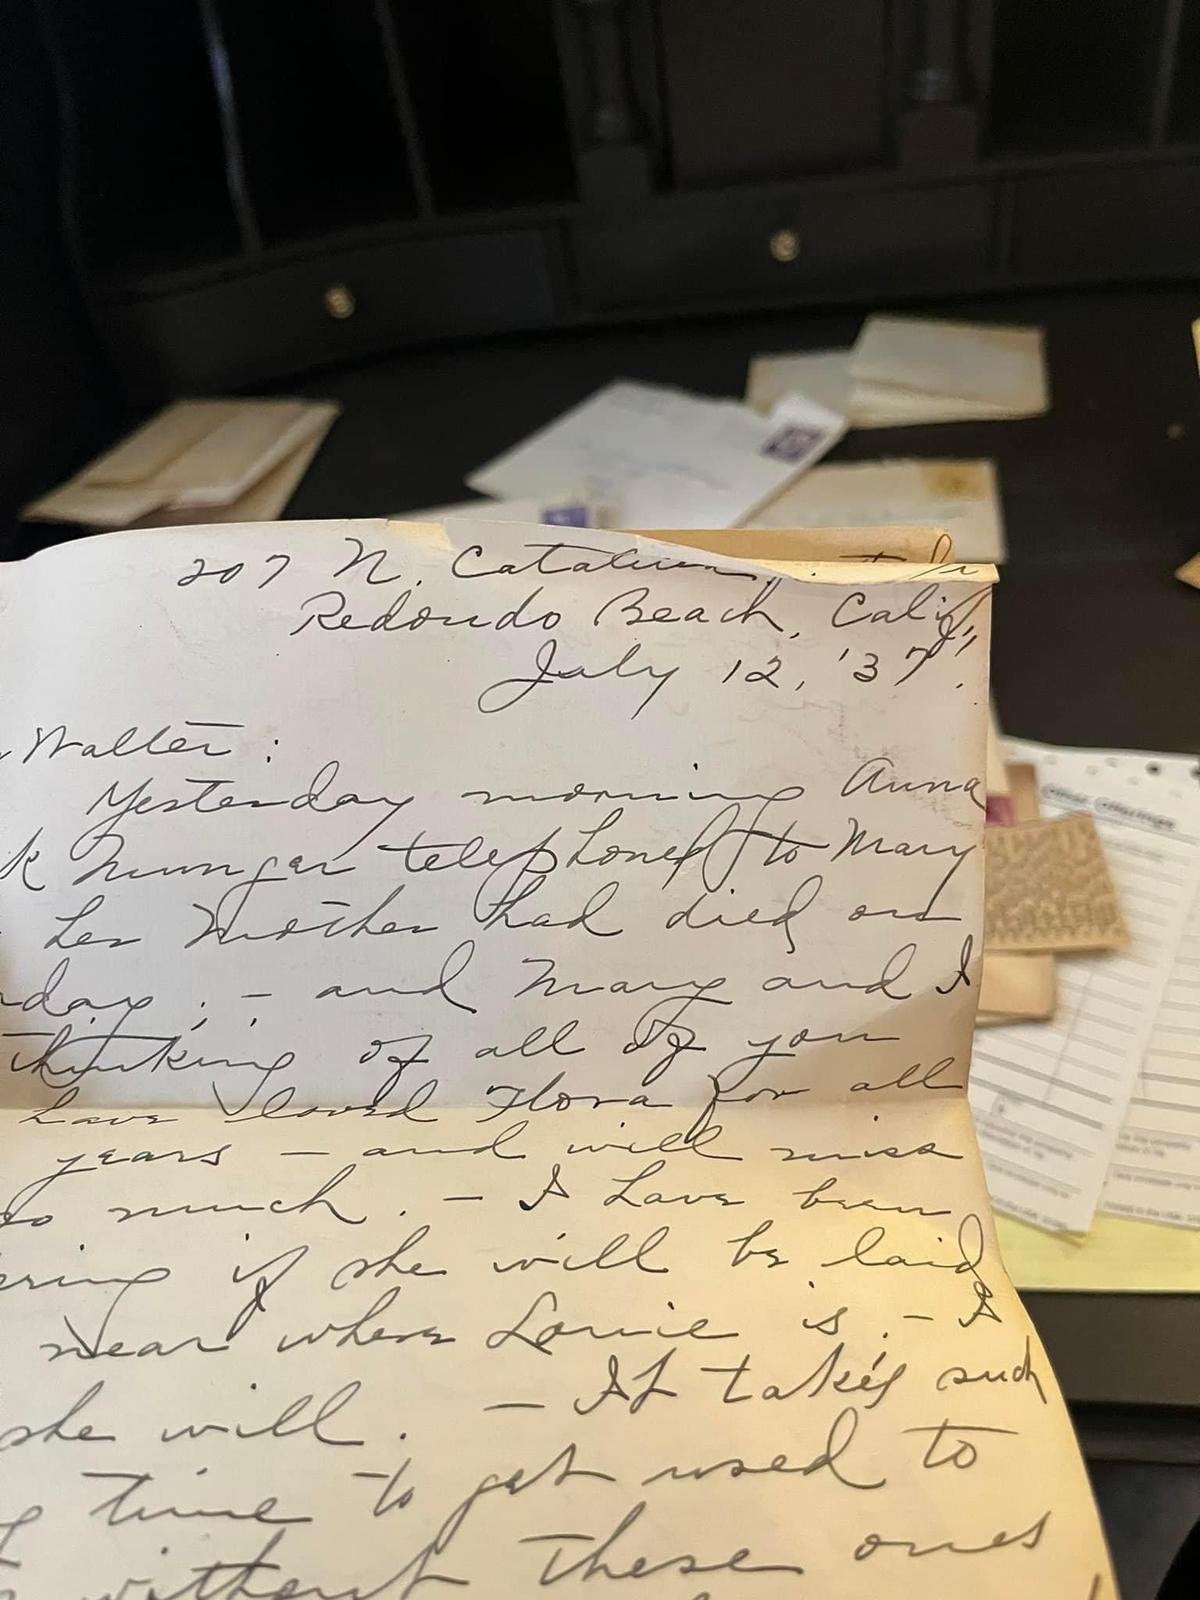 Letters that were found in the desk. (Courtesy of Jenna Riggs)